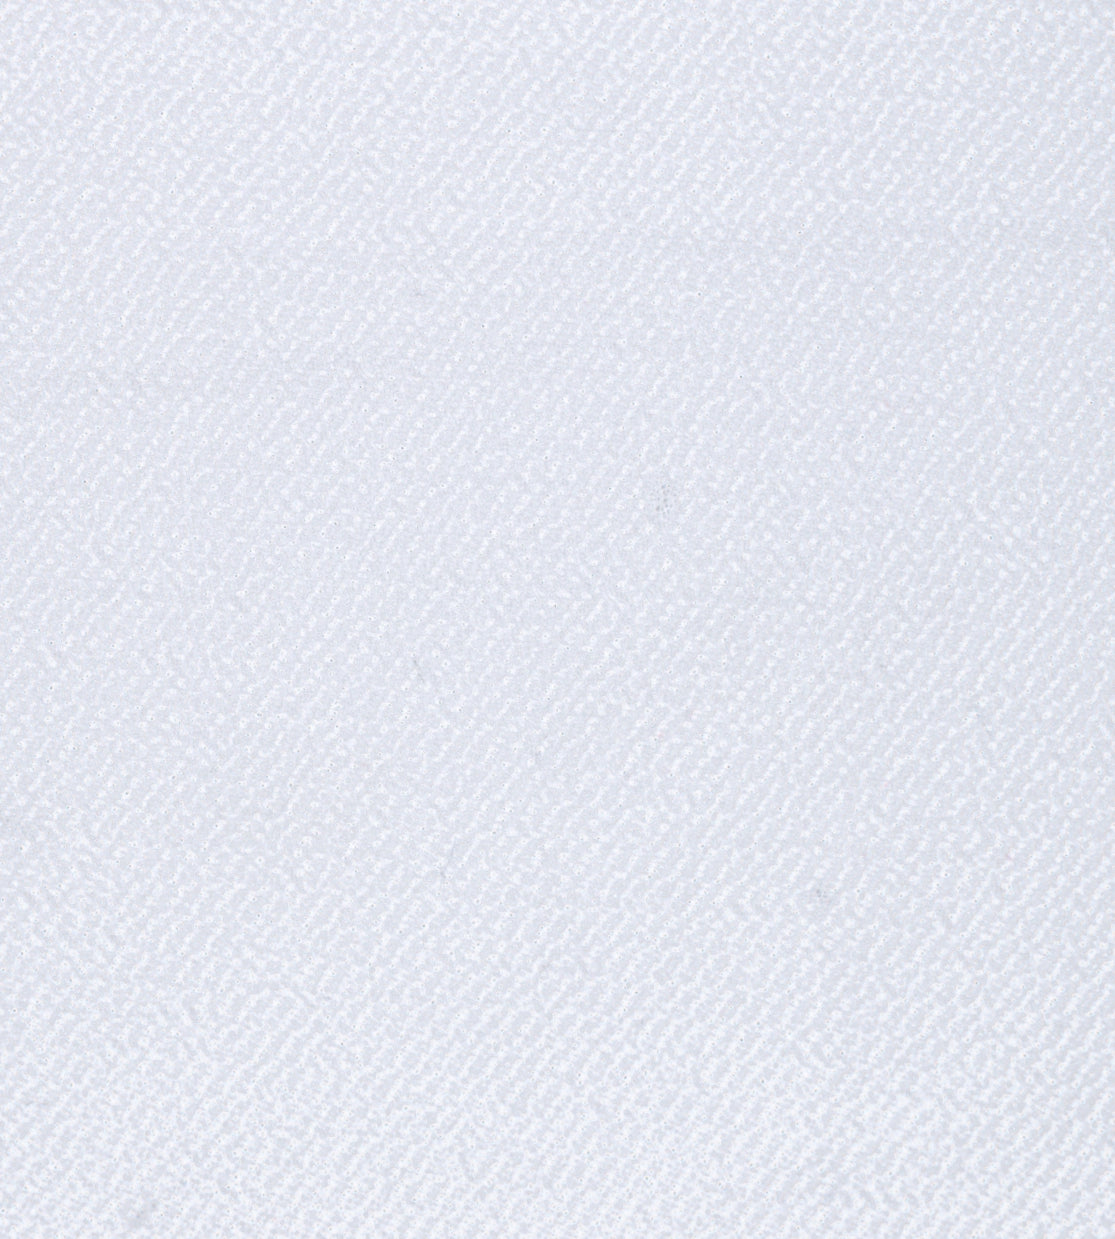 35005-01 White Polyester Plain Dyed 280g/yd 54&quot; plain dyed polyester white woven Solid Color - knit fabric - woven fabric - fabric company - fabric wholesale - fabric b2b - fabric factory - high quality fabric - hong kong fabric - fabric hk - acetate fabric - cotton fabric - linen fabric - metallic fabric - nylon fabric - polyester fabric - spandex fabric - chun wing hing - cwh hk - fabric worldwide ship - 針織布 - 梳織布 - 布料公司- 布料批發 - 香港布料 - 秦榮興